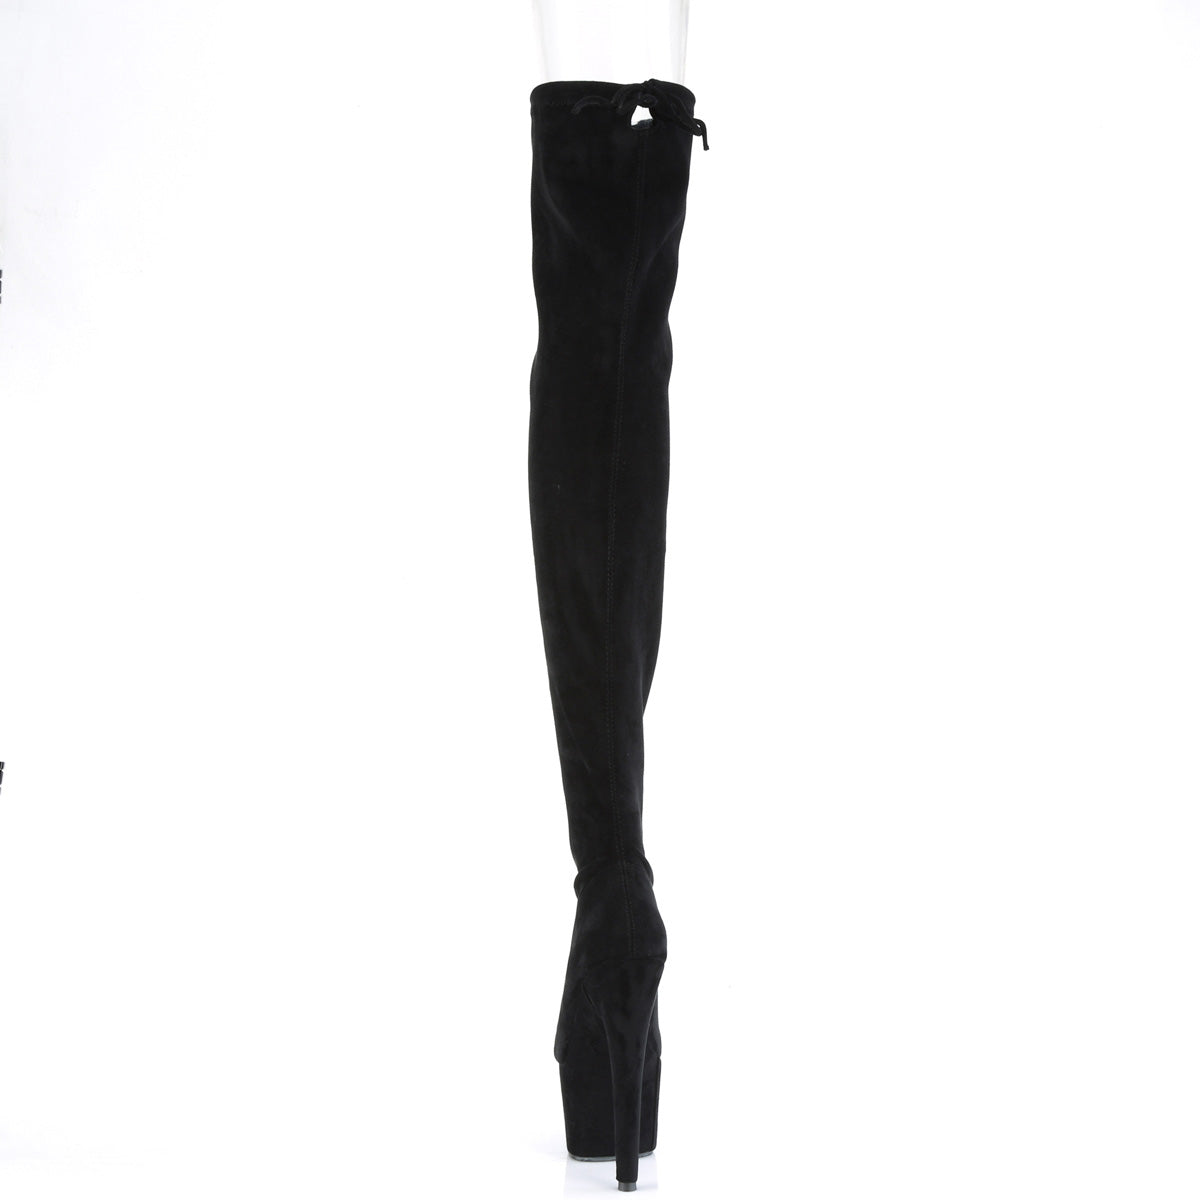 Sexier Than Ever Thigh High Boots